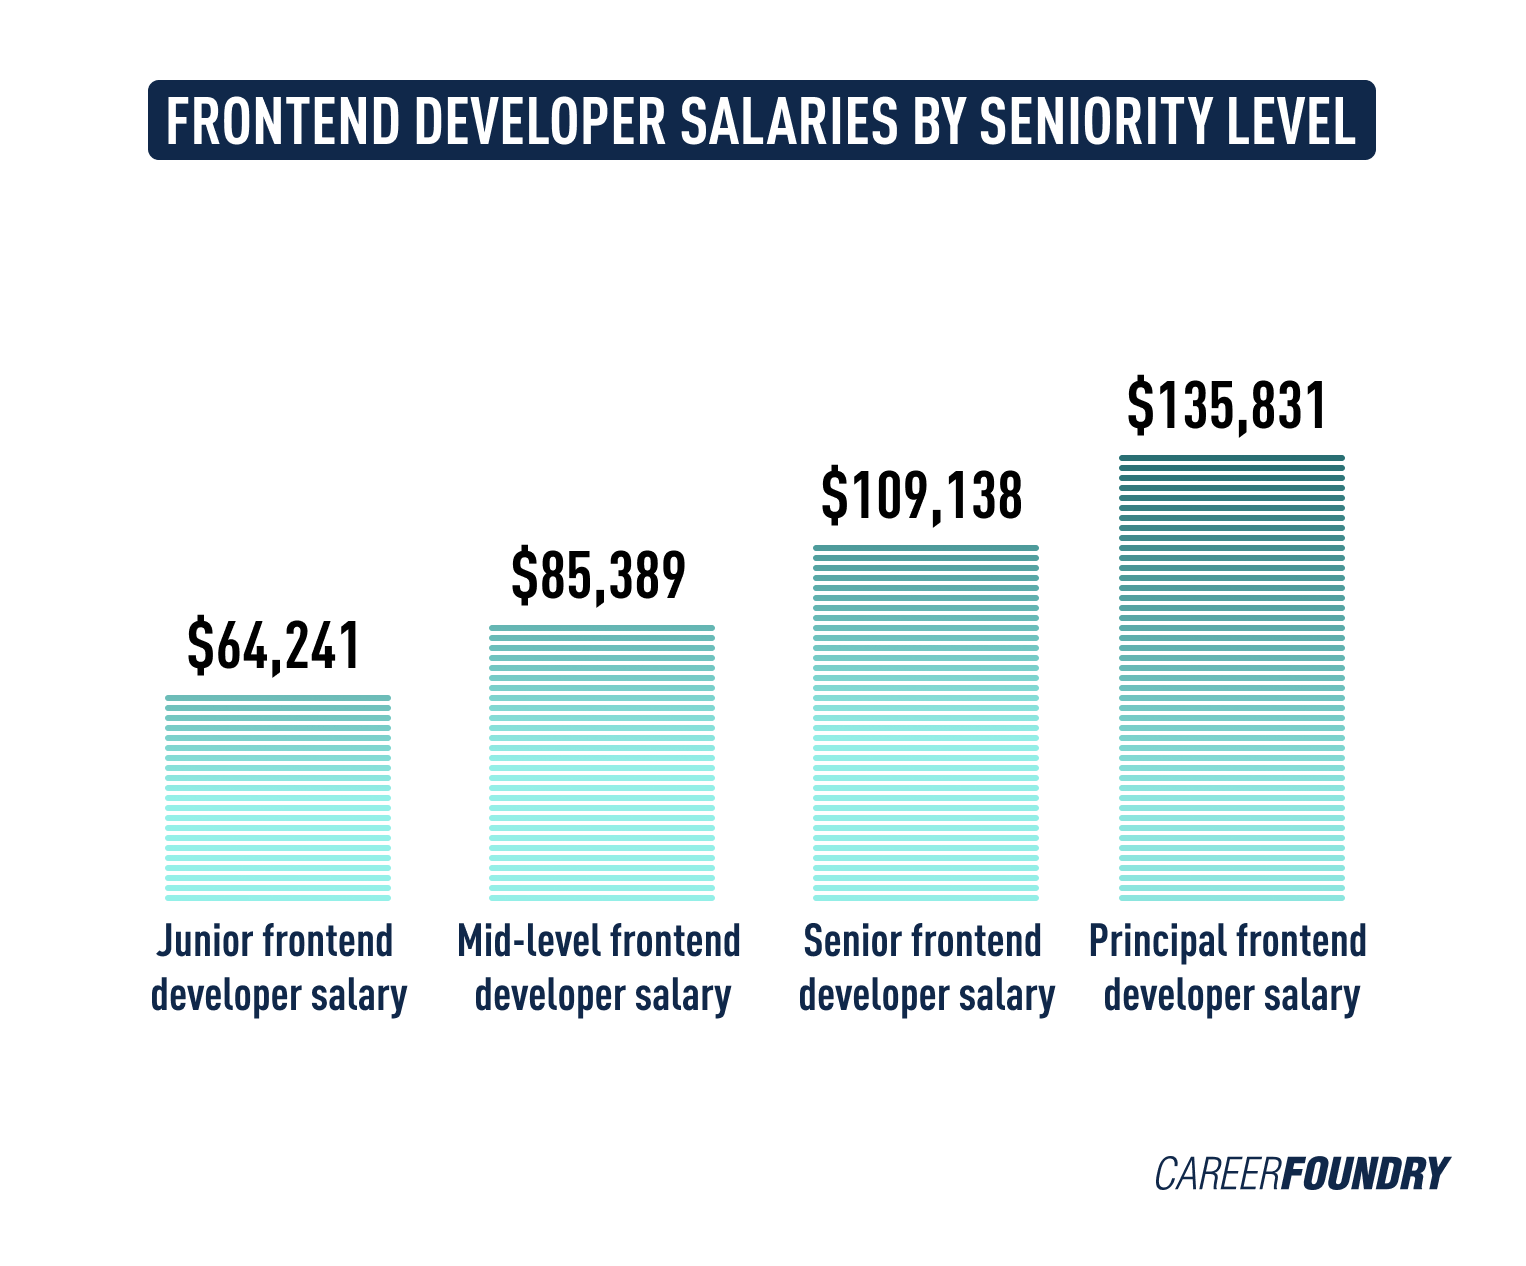 A bar chart illustrating the average junior, mid-level, senior, and principal frontend developer salaries in the US.